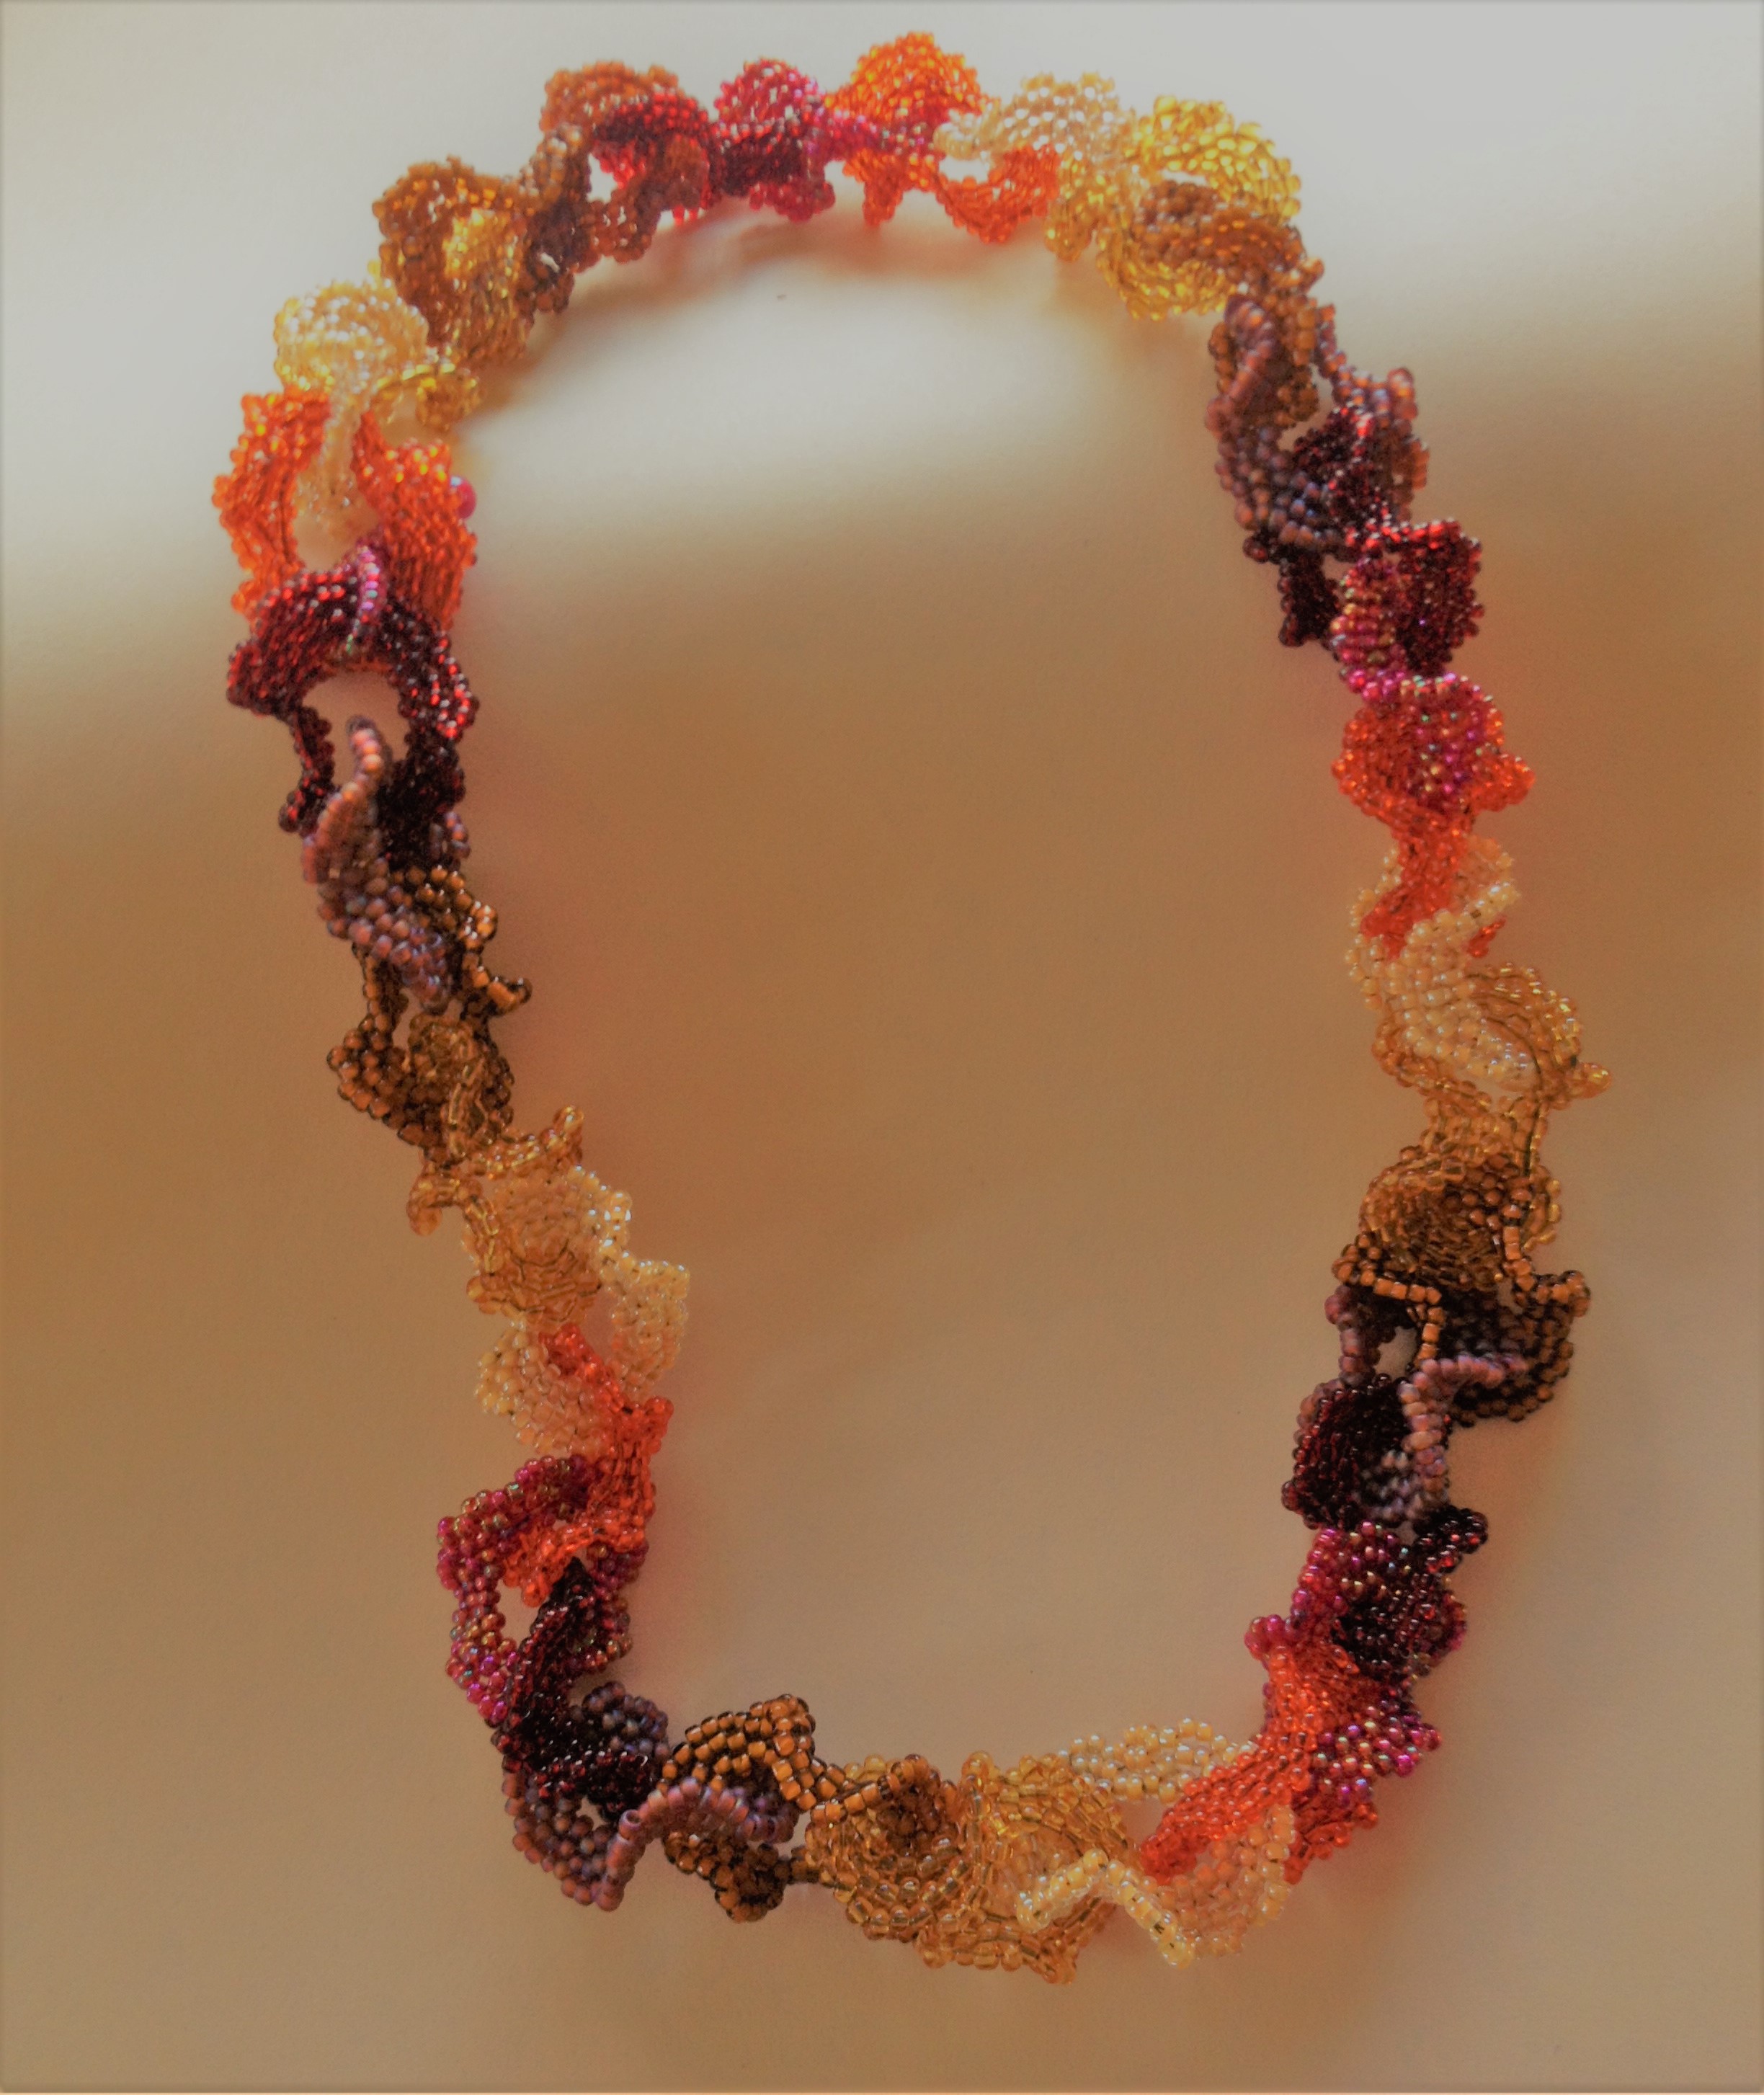 CAROL NEWMEYER Falling leaves necklace 18" Glass Beads $100.00